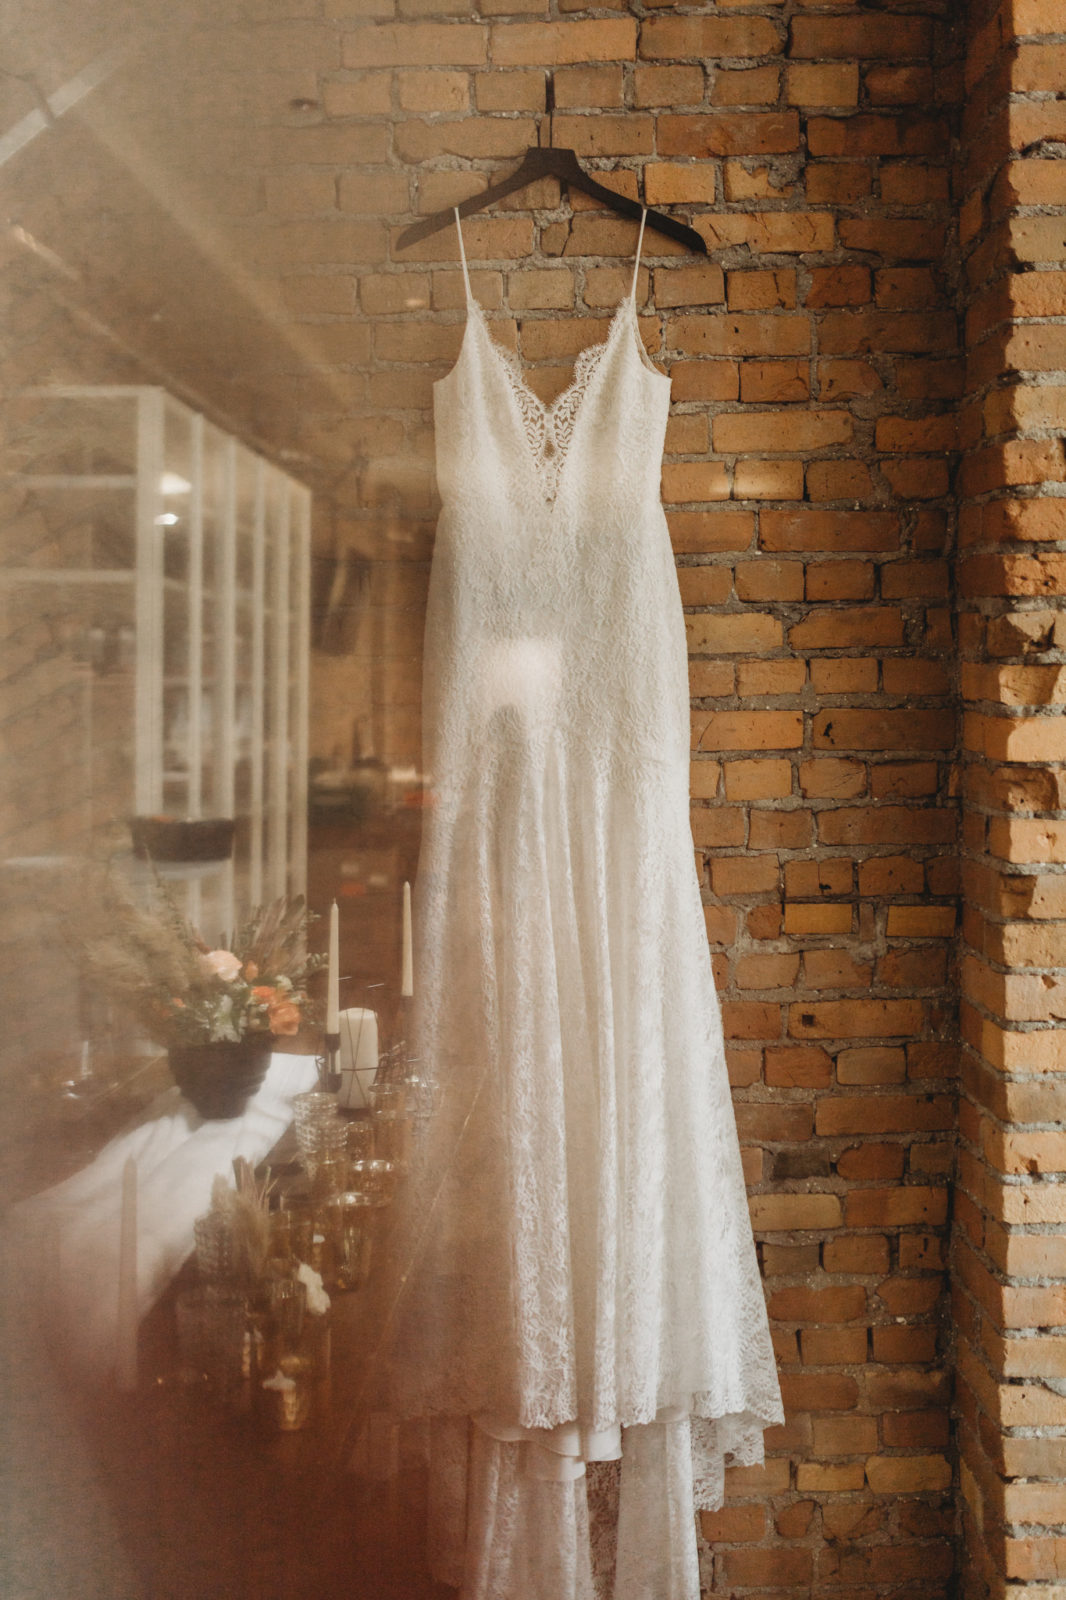 Lace dress by Anais Anette Flagship hangs against a brick wall at The Garett